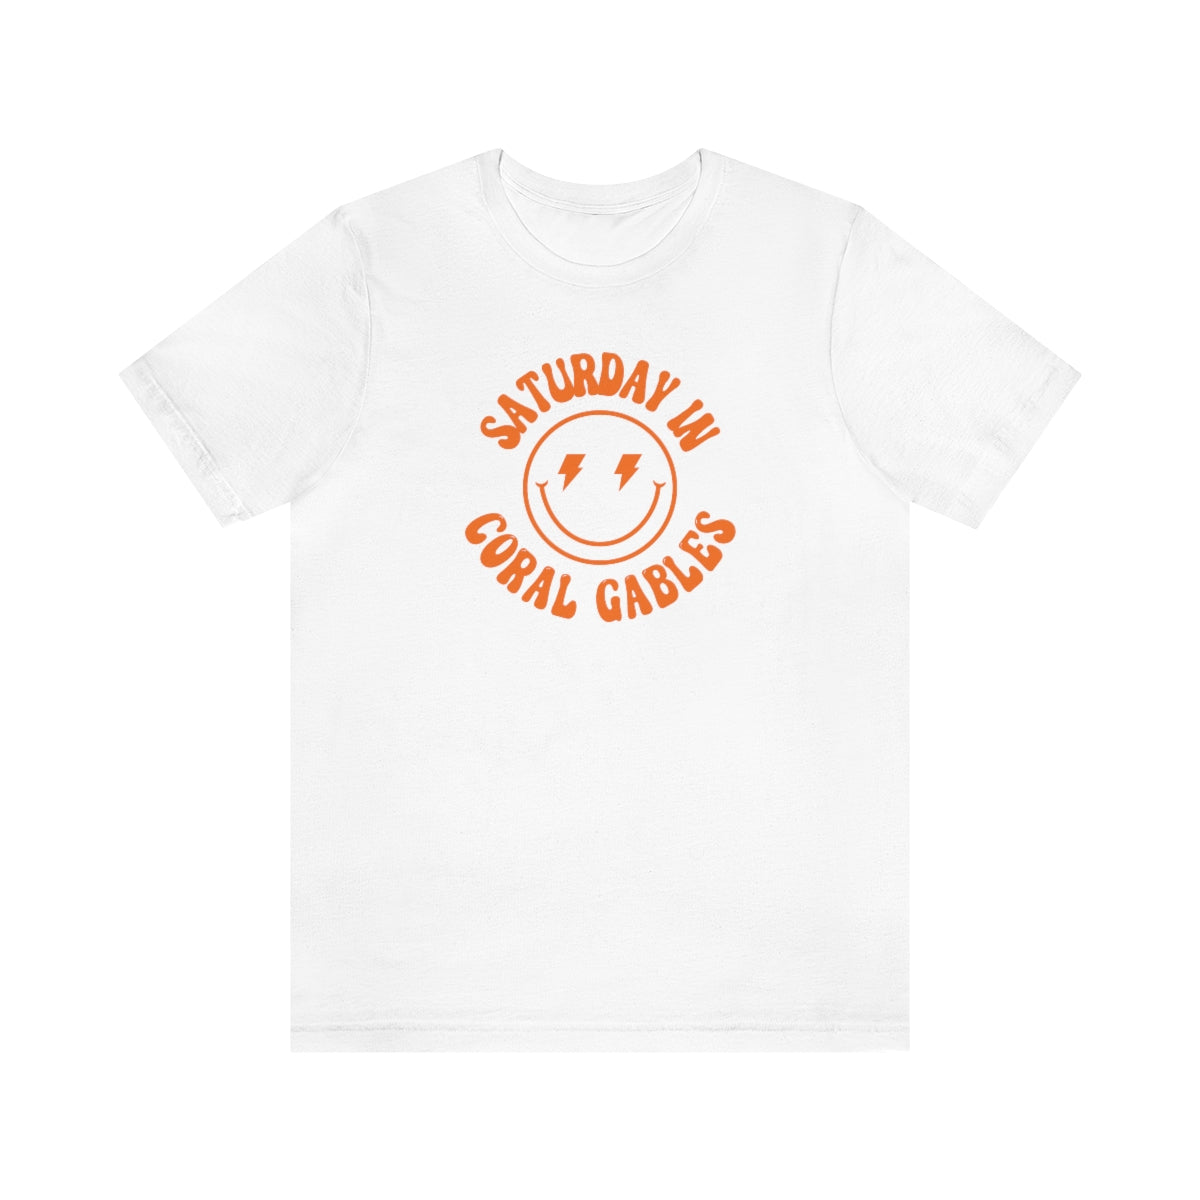 Smiley Coral Short Sleeve Tee - GG